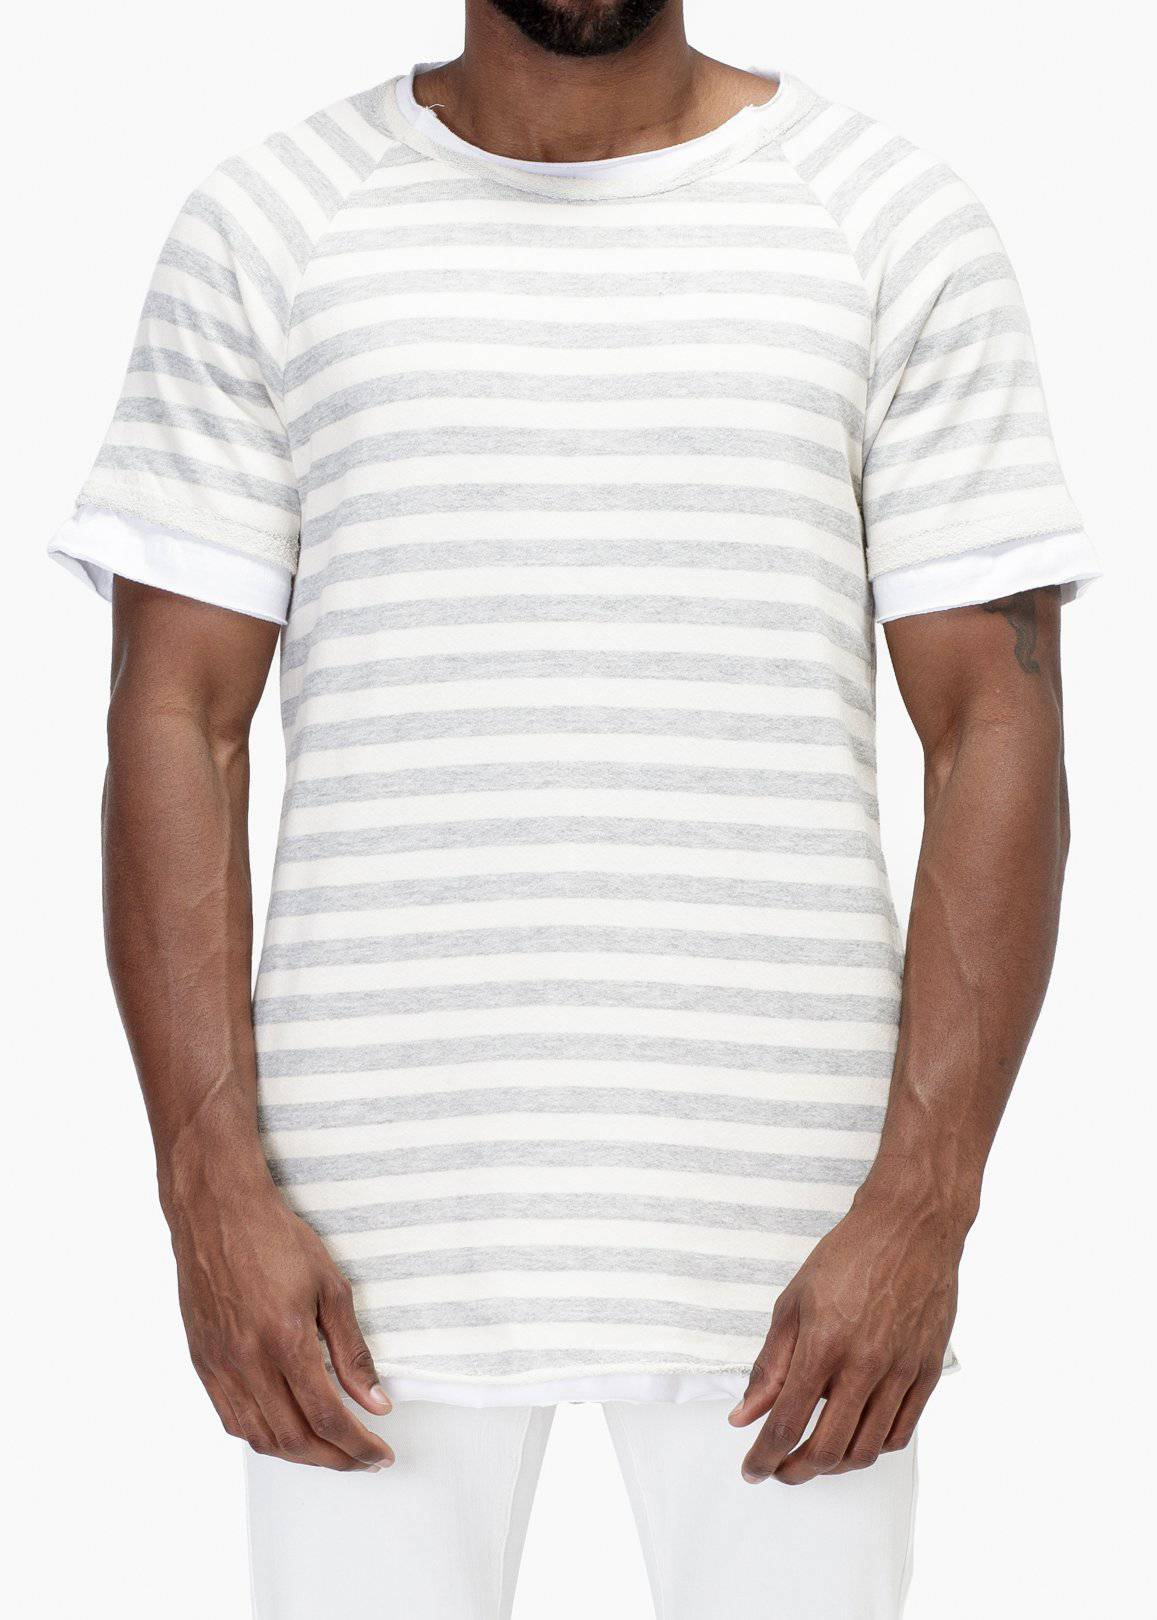 Konus Men's Layered SS French Terry Tee in Natural Stripe by Shop at Konus